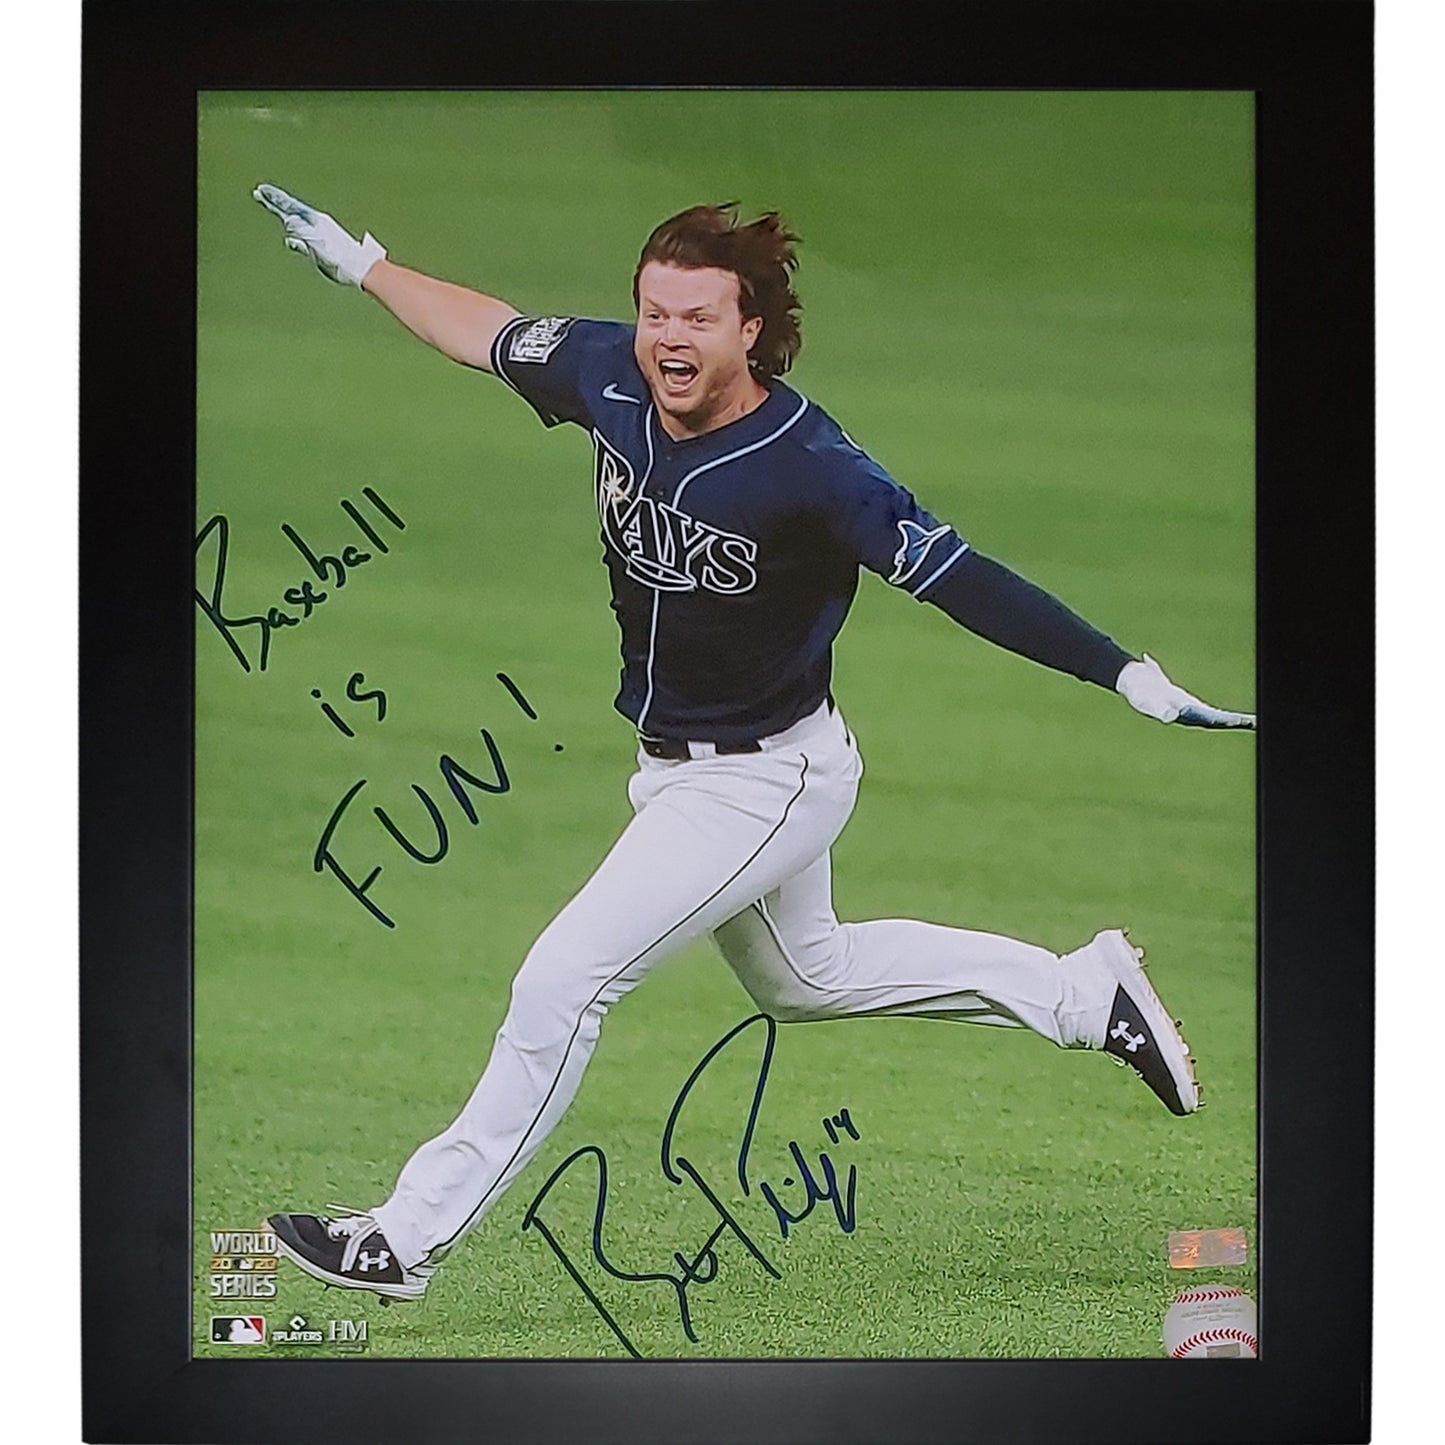 Brett Phillips Autographed Tampa Bay Rays (World Series Airplane) 11x14 Framed Photo w/ "Baseball is Fun"